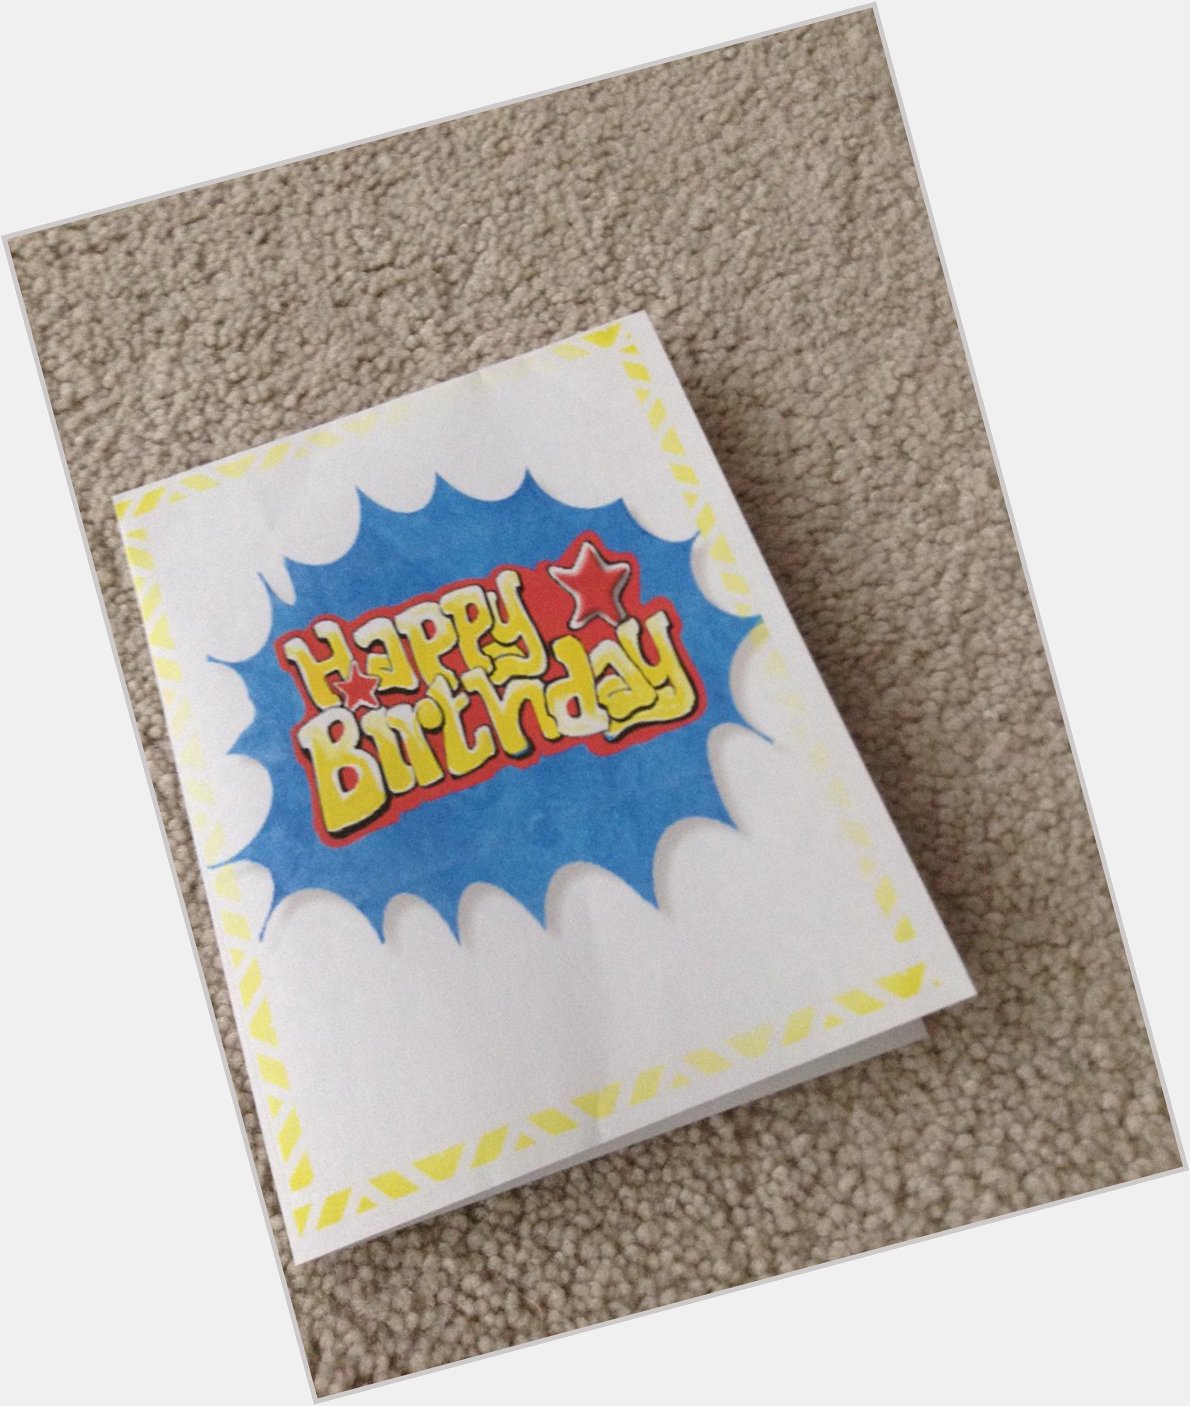  Happy Birthday to you here is a special card for you      